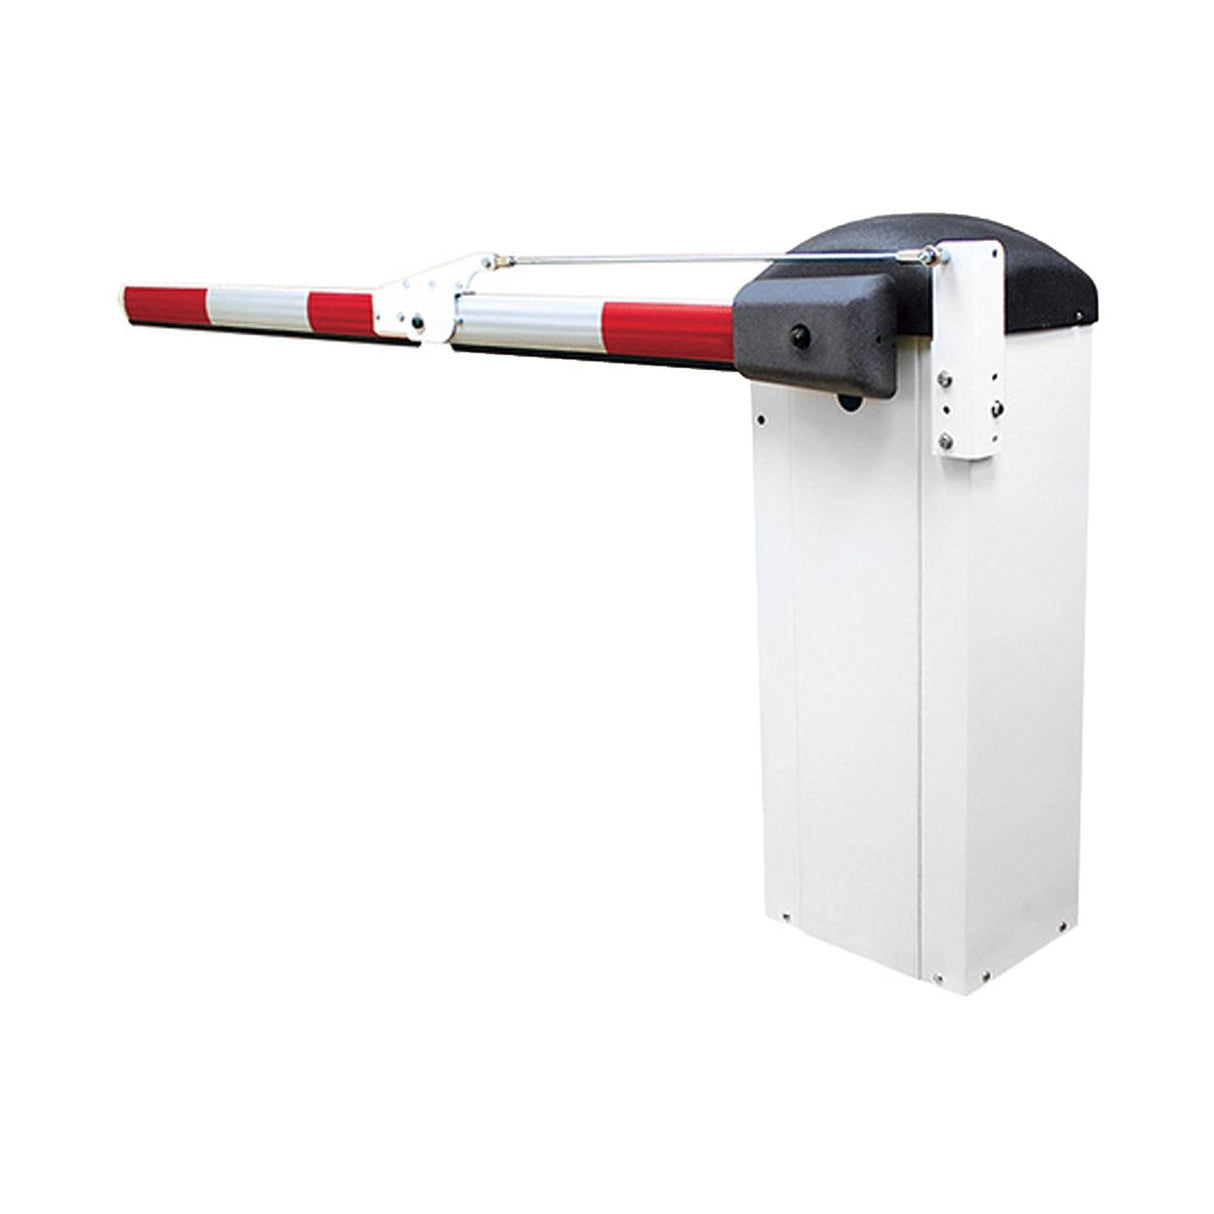 Hysecurity STRONGARMPARK DC14 Barrier Gate Opener